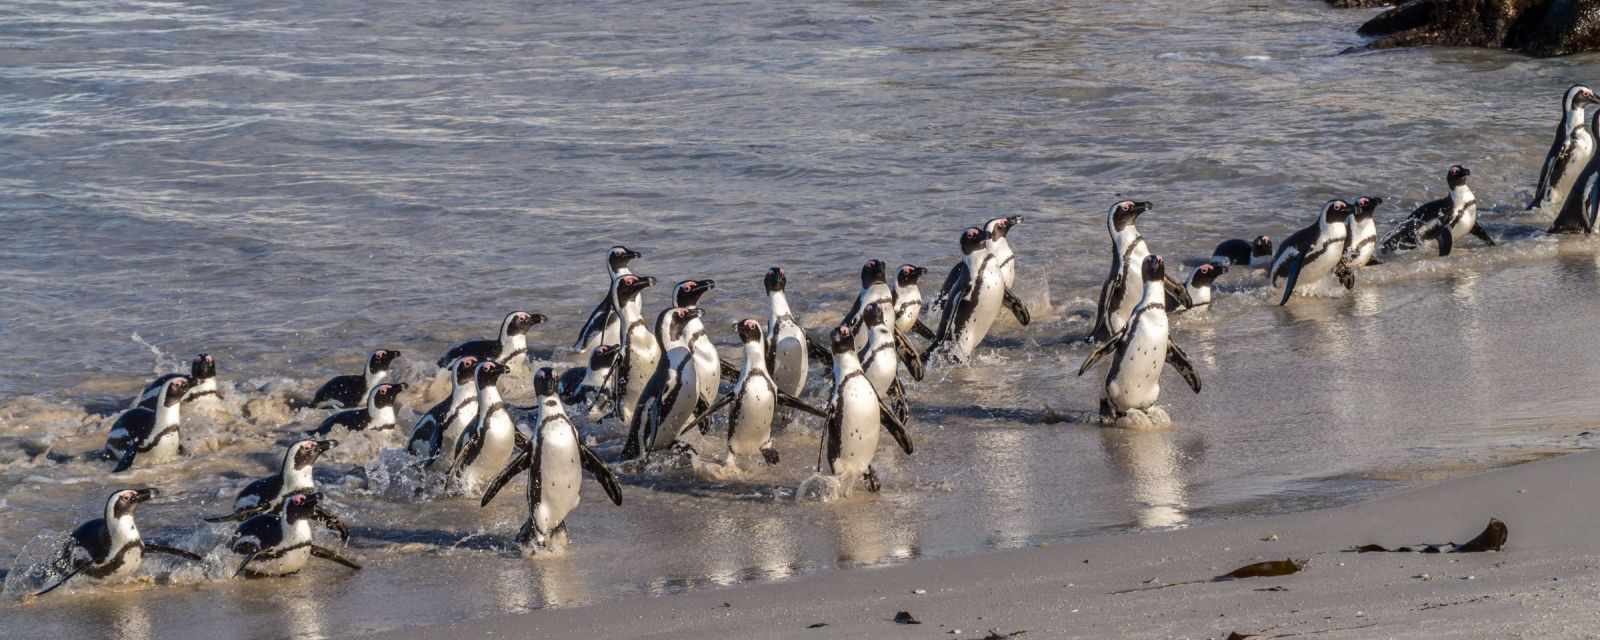 Hundreds of penguins coming back to their nests in the late afternoon